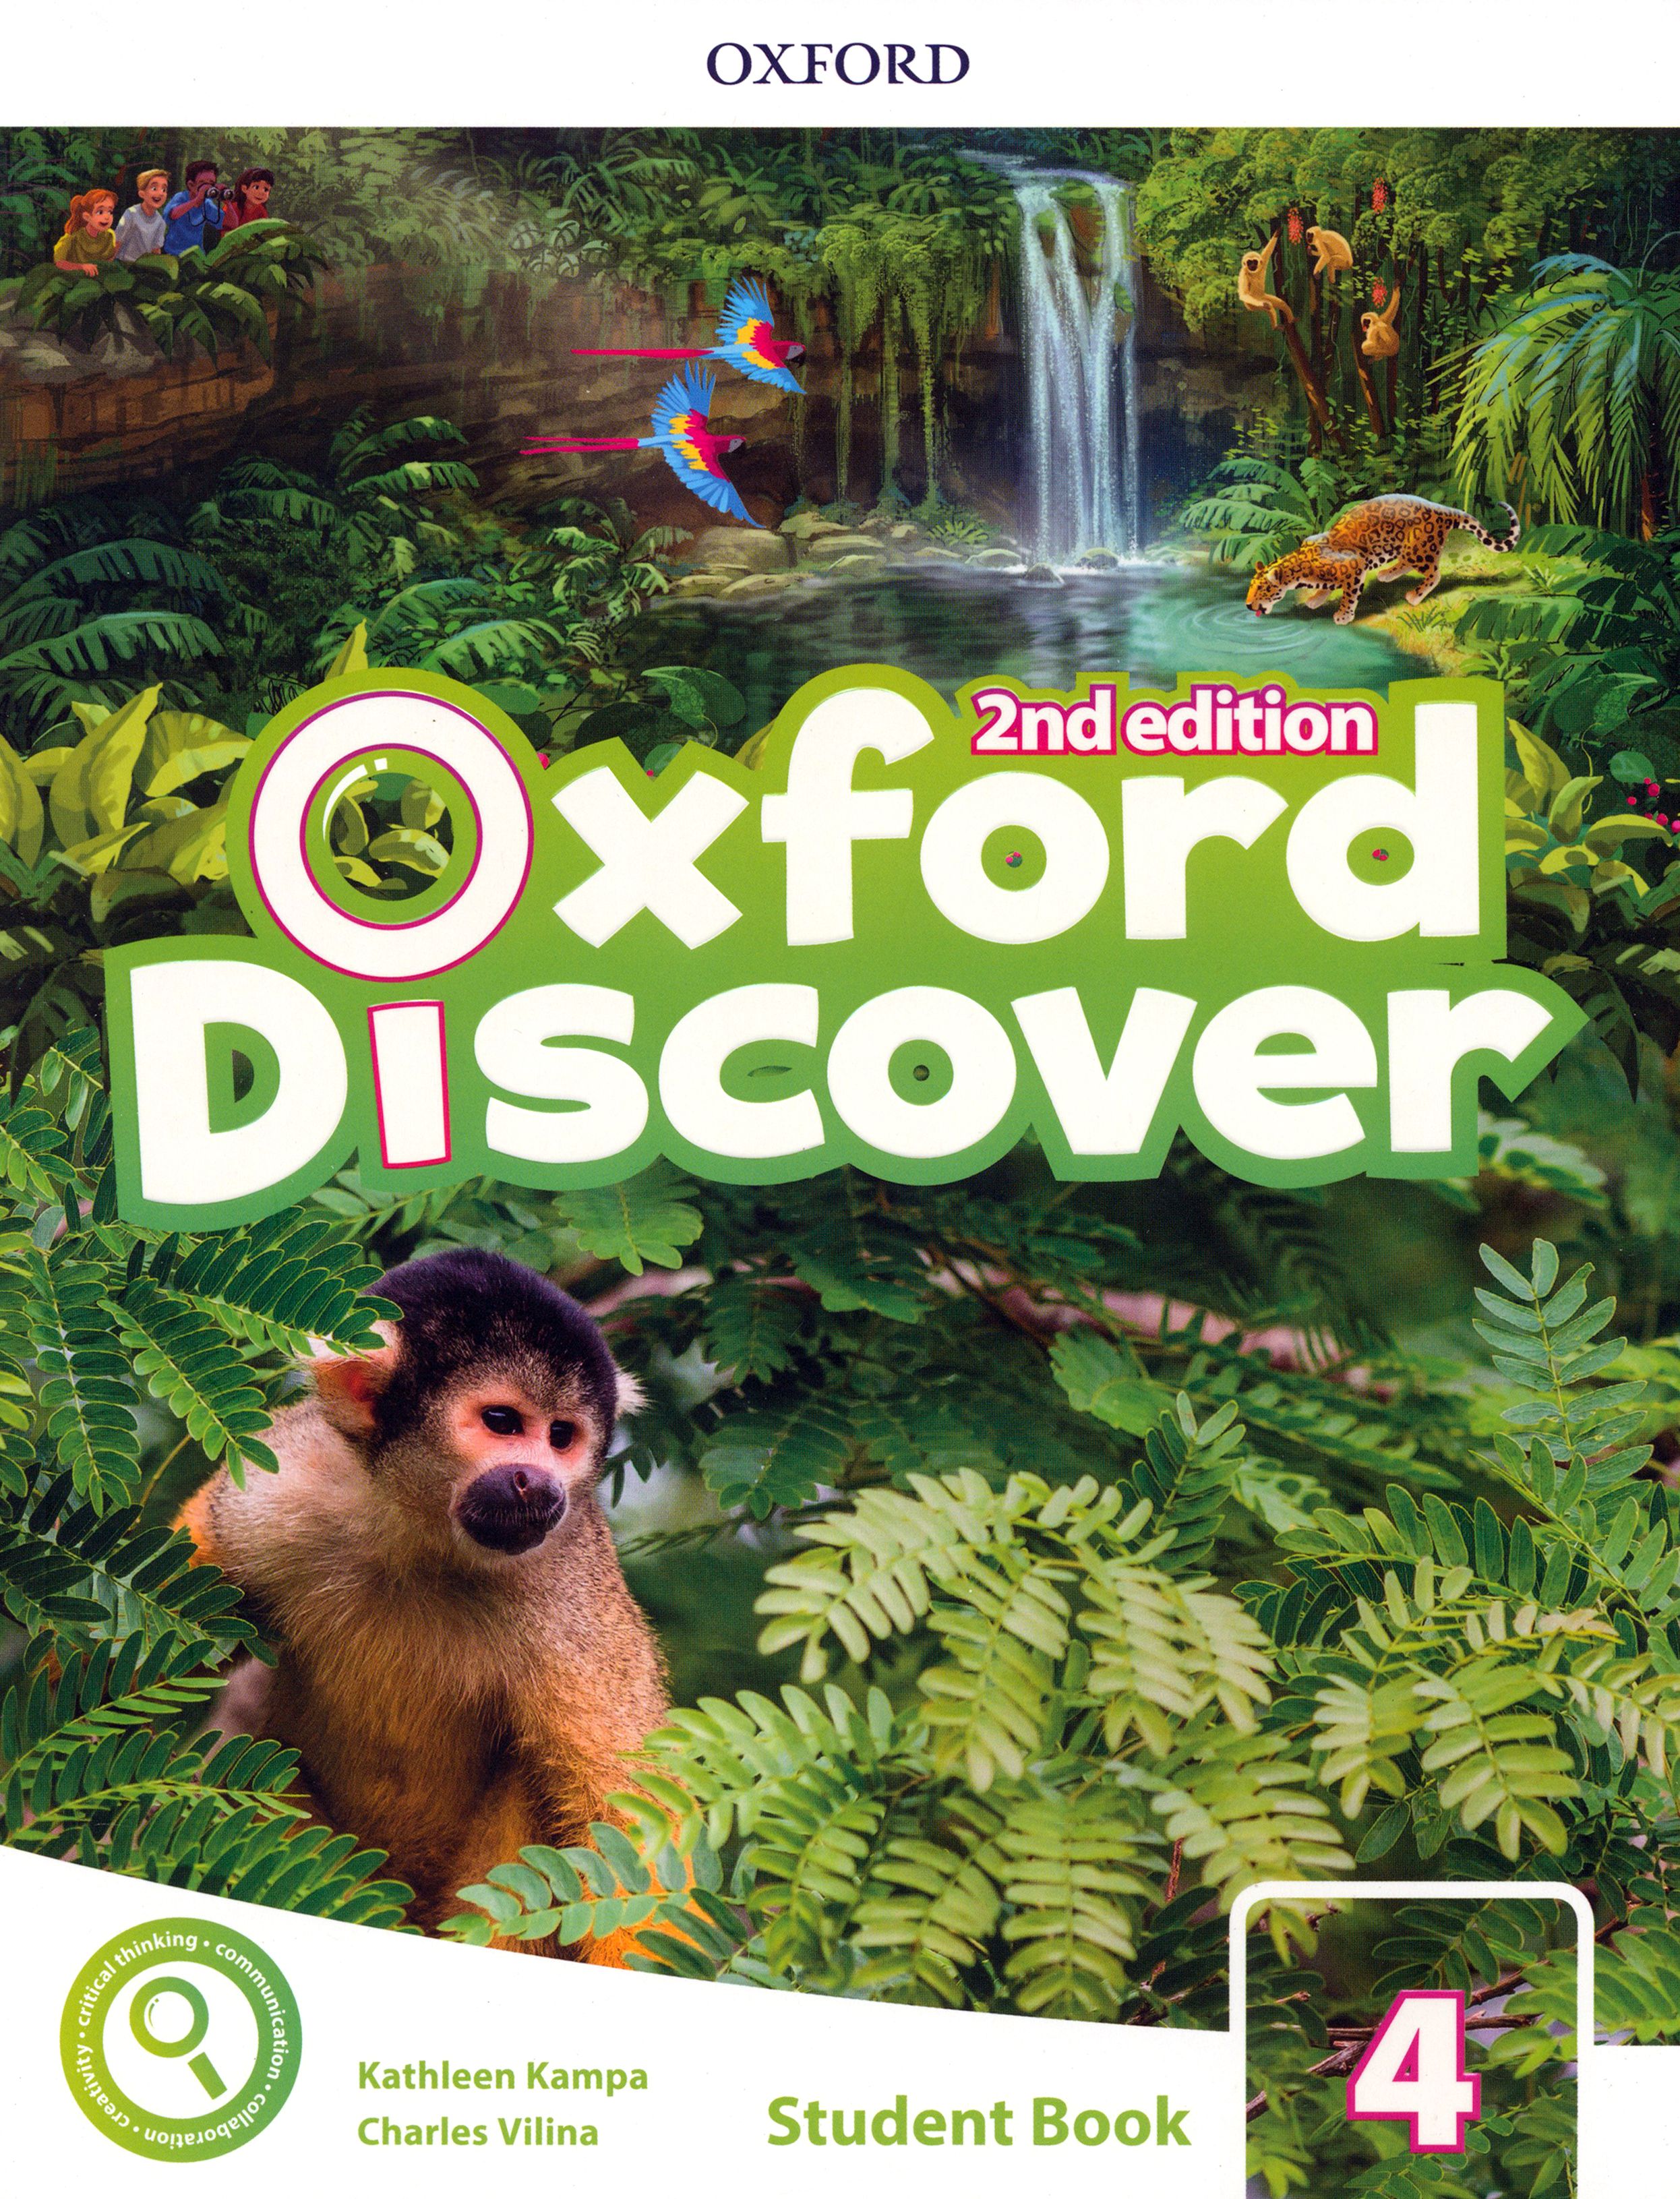 Oxford discover book. Oxford discover 4 2nd Edition. Oxford discover 2nd Edition 5. Oxford discover 2nd Edition. Oxford discover 2 student book.